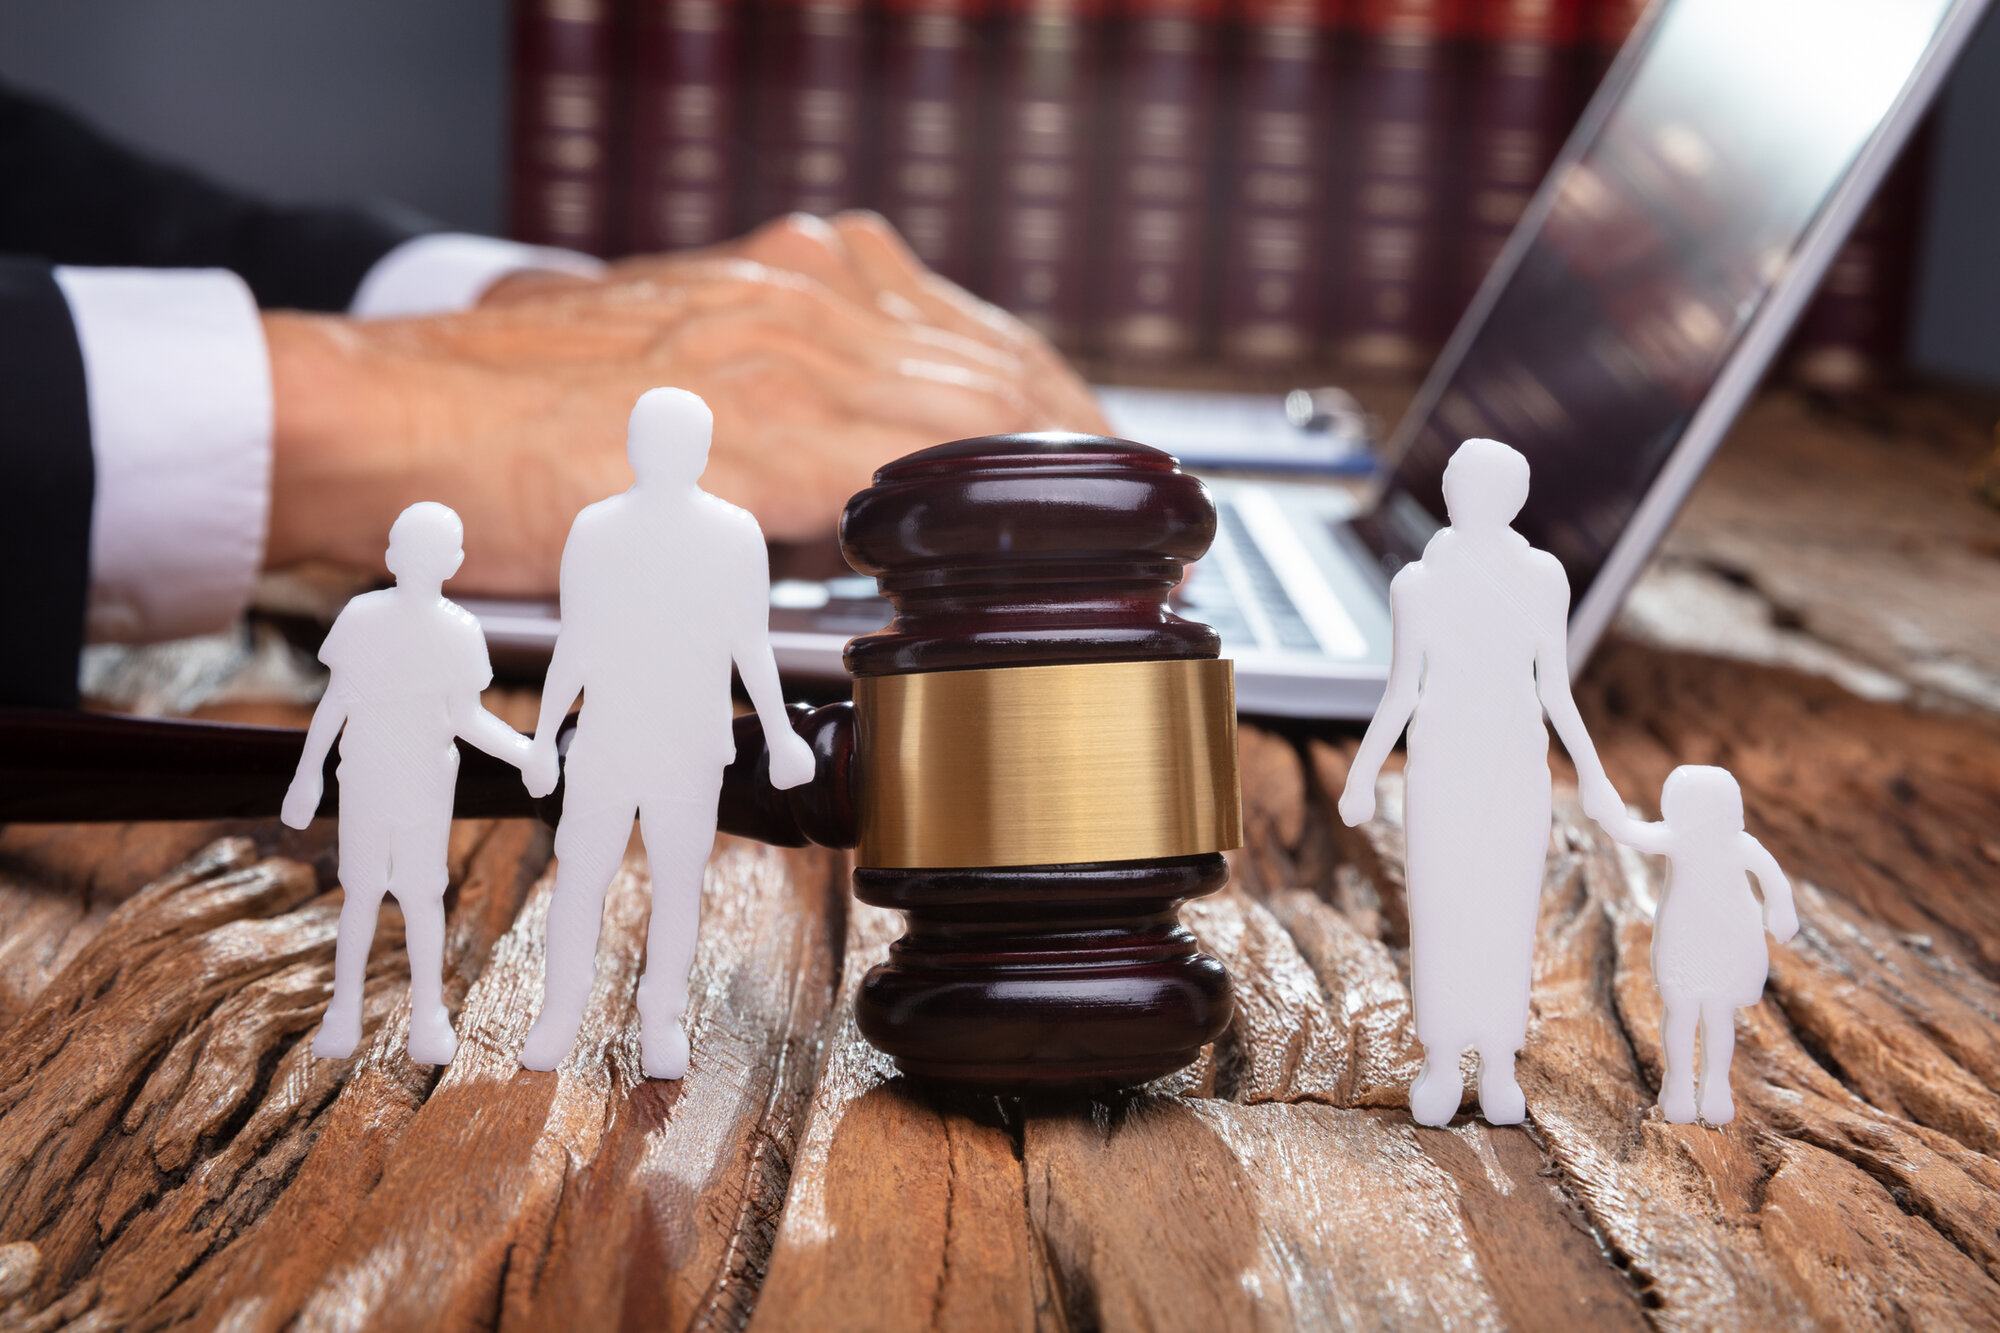 How to Find a Pro Bono Family Lawyer